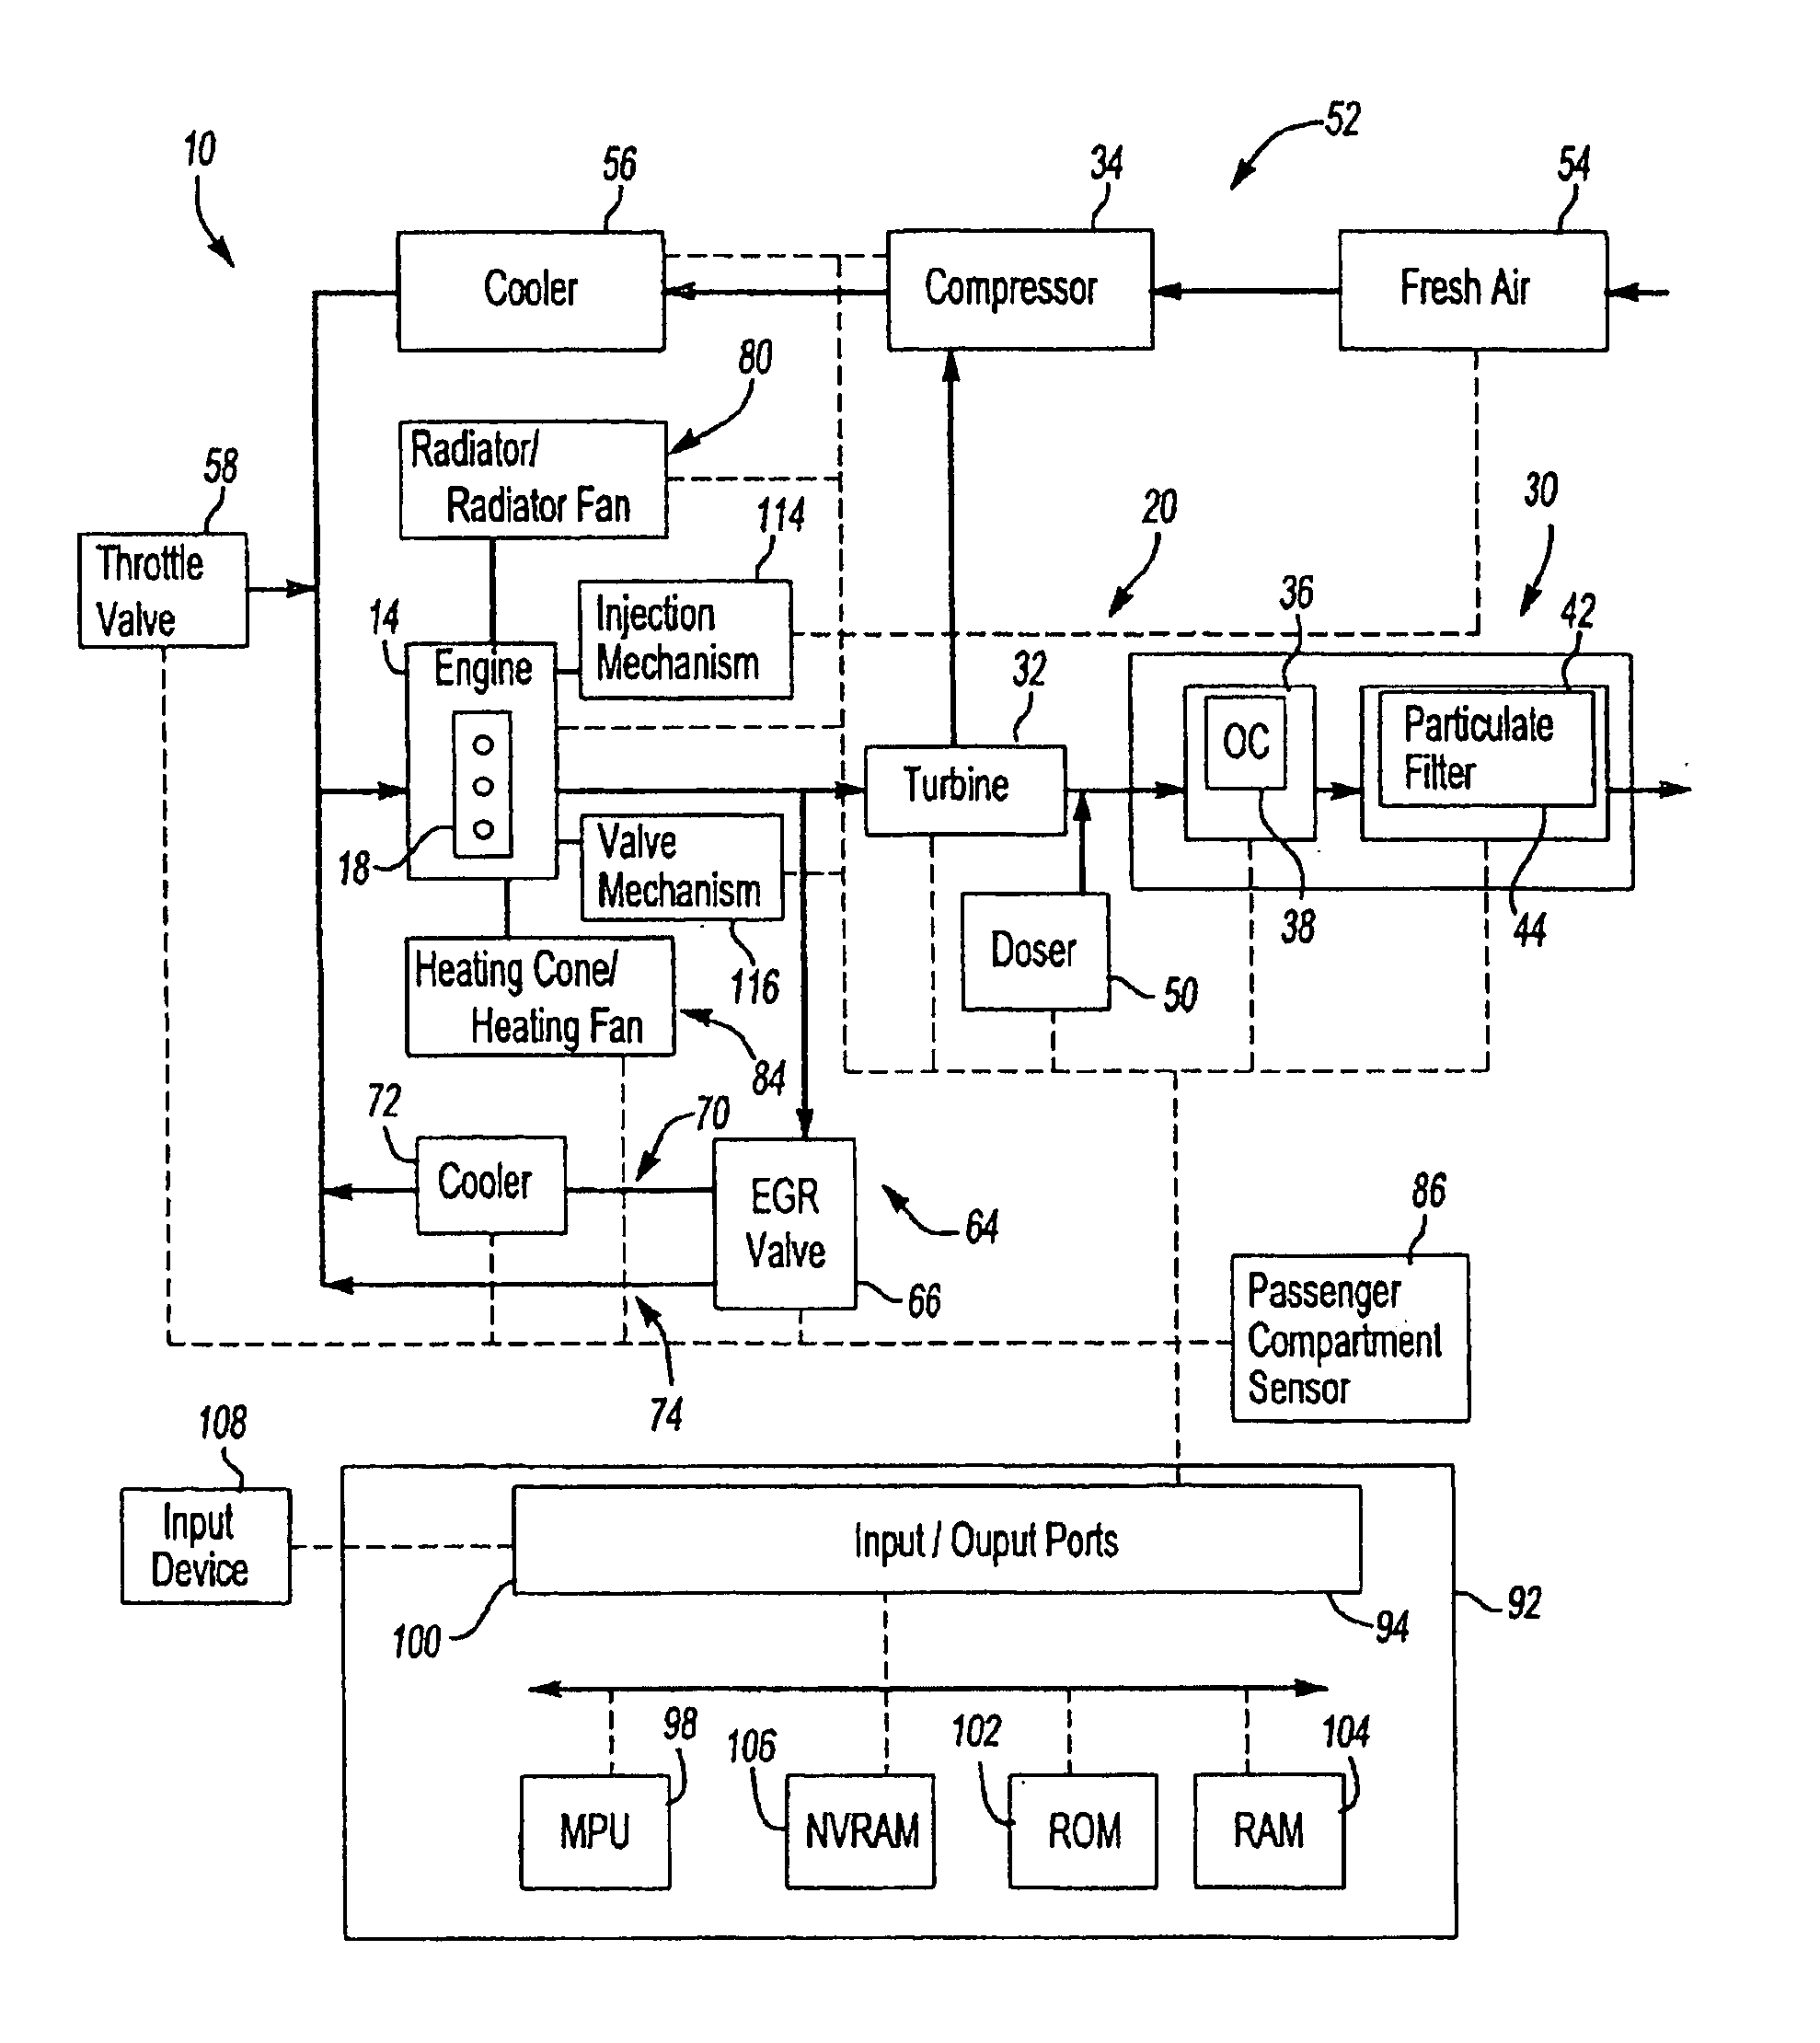 Method and system of diesel engine setpoint compensation for transient operation of a heavy duty diesel engine